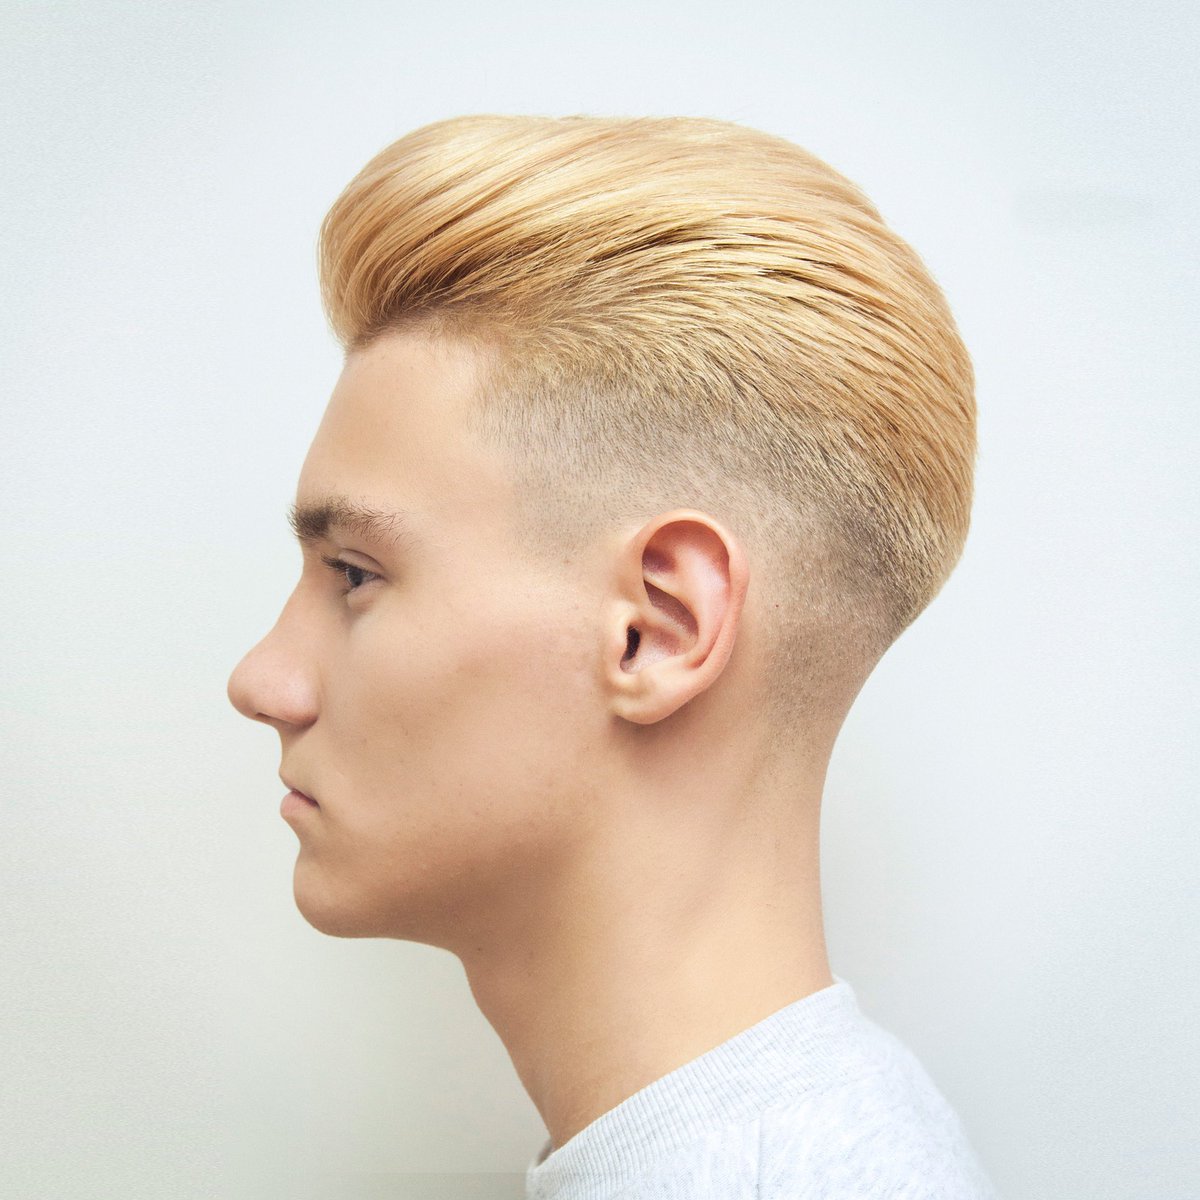 #tbt to one of our favourite cuts of the year from BMB ambassador @sottungacademy!